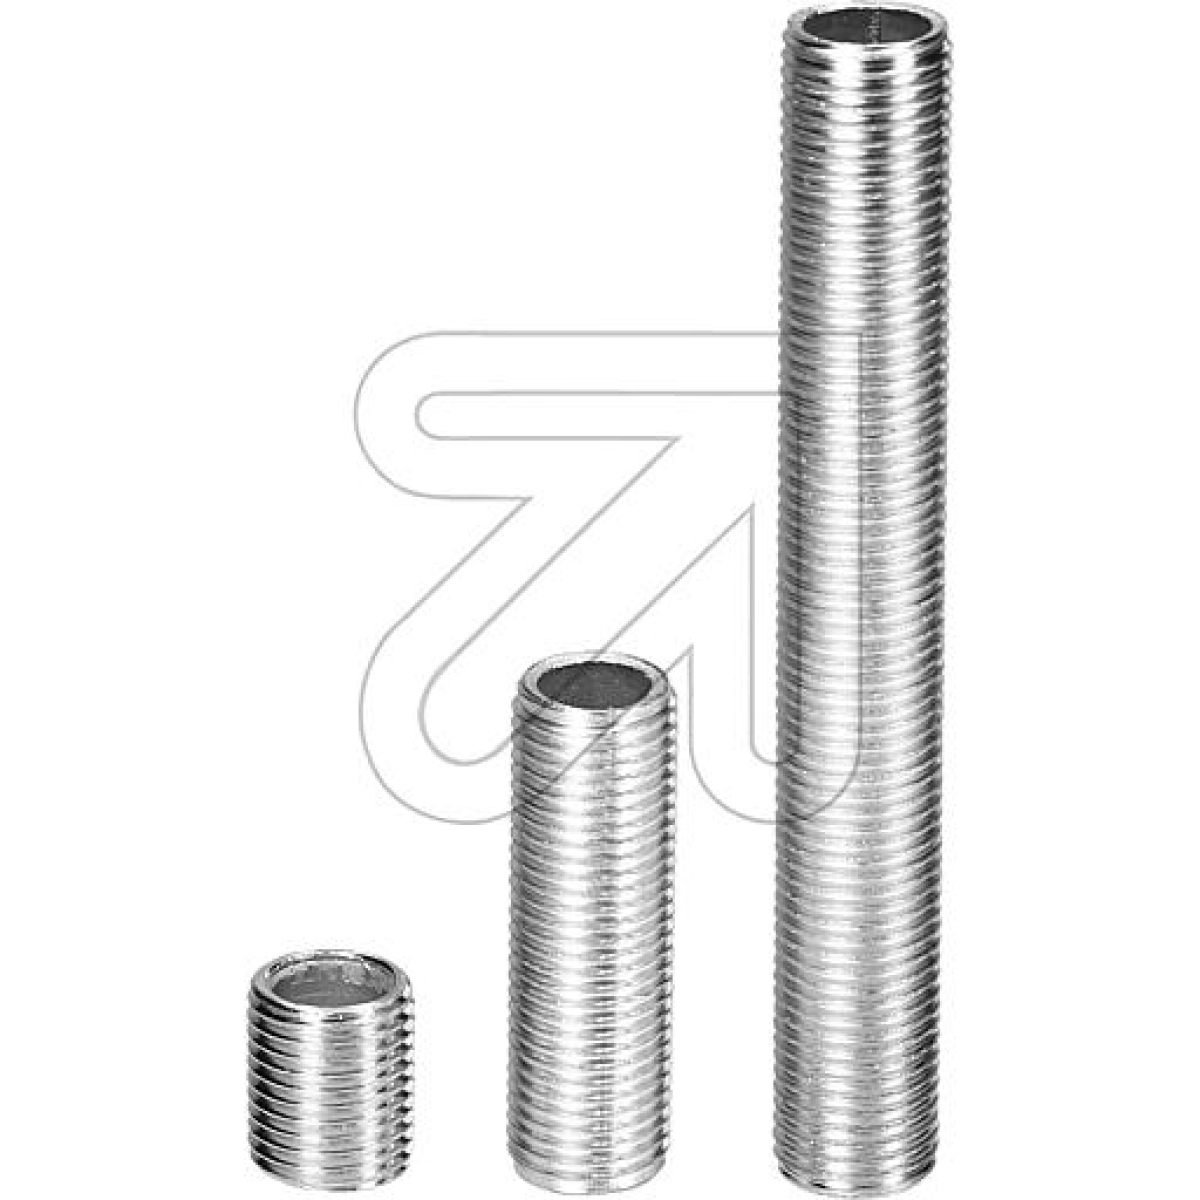 D. W. BendlerThreaded tube galvanized M10a/L30mm 1540.0101.0030.2104-Price for 10 pcs.Article-No: 601310